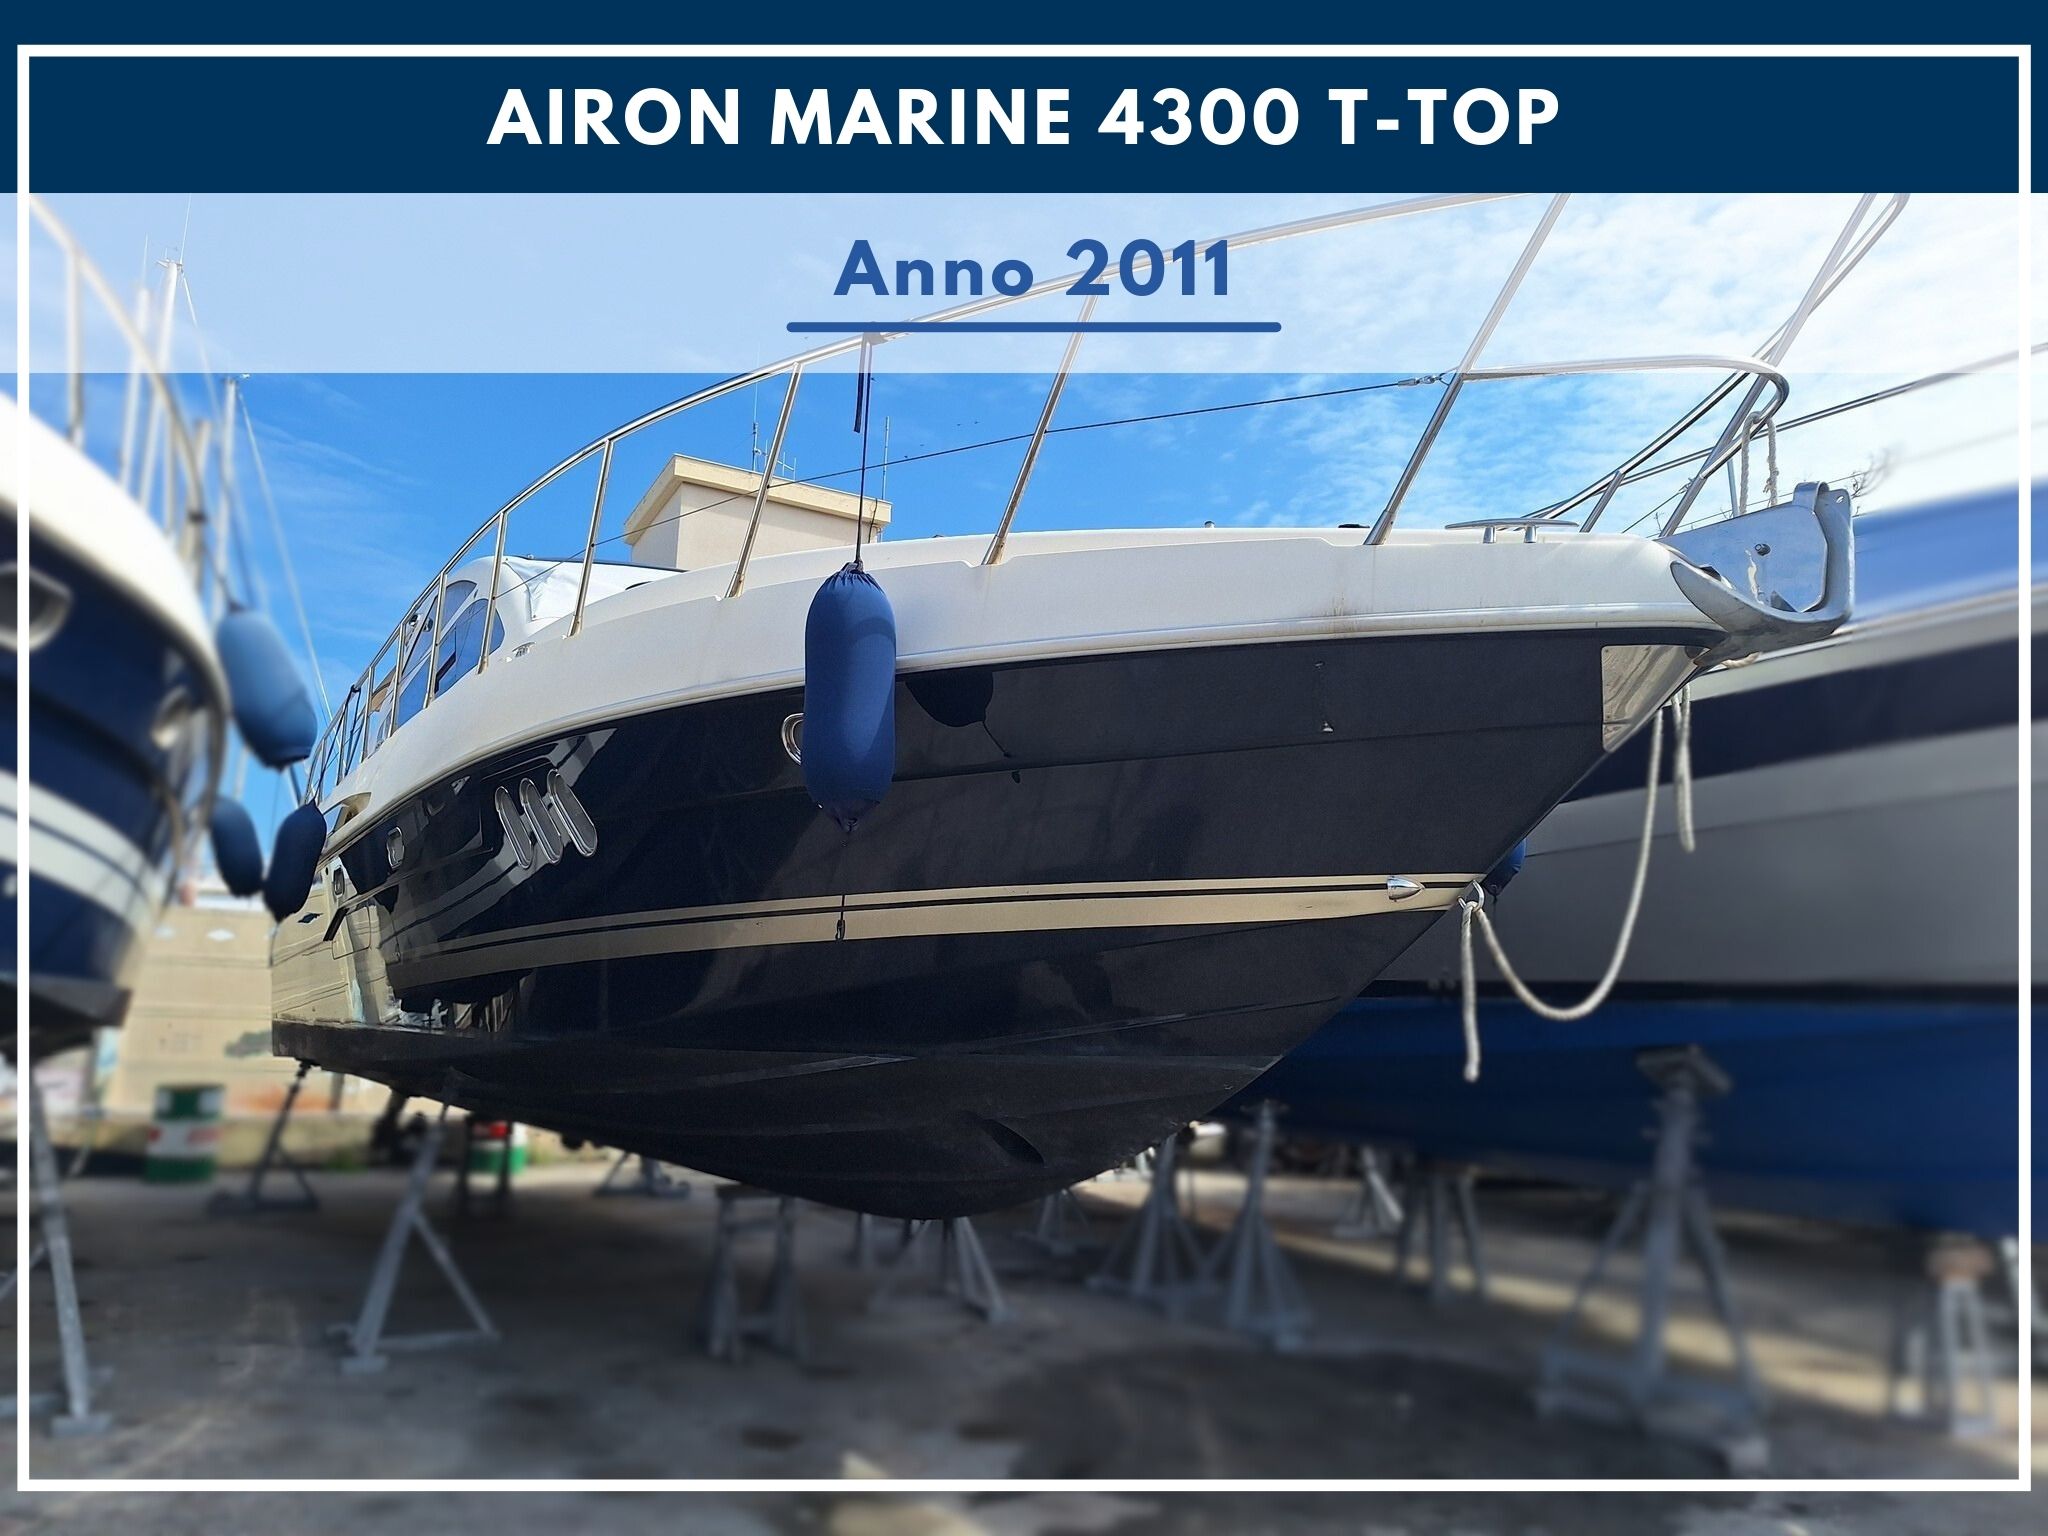 New Arrival: Airon Marine 4300 T-Top